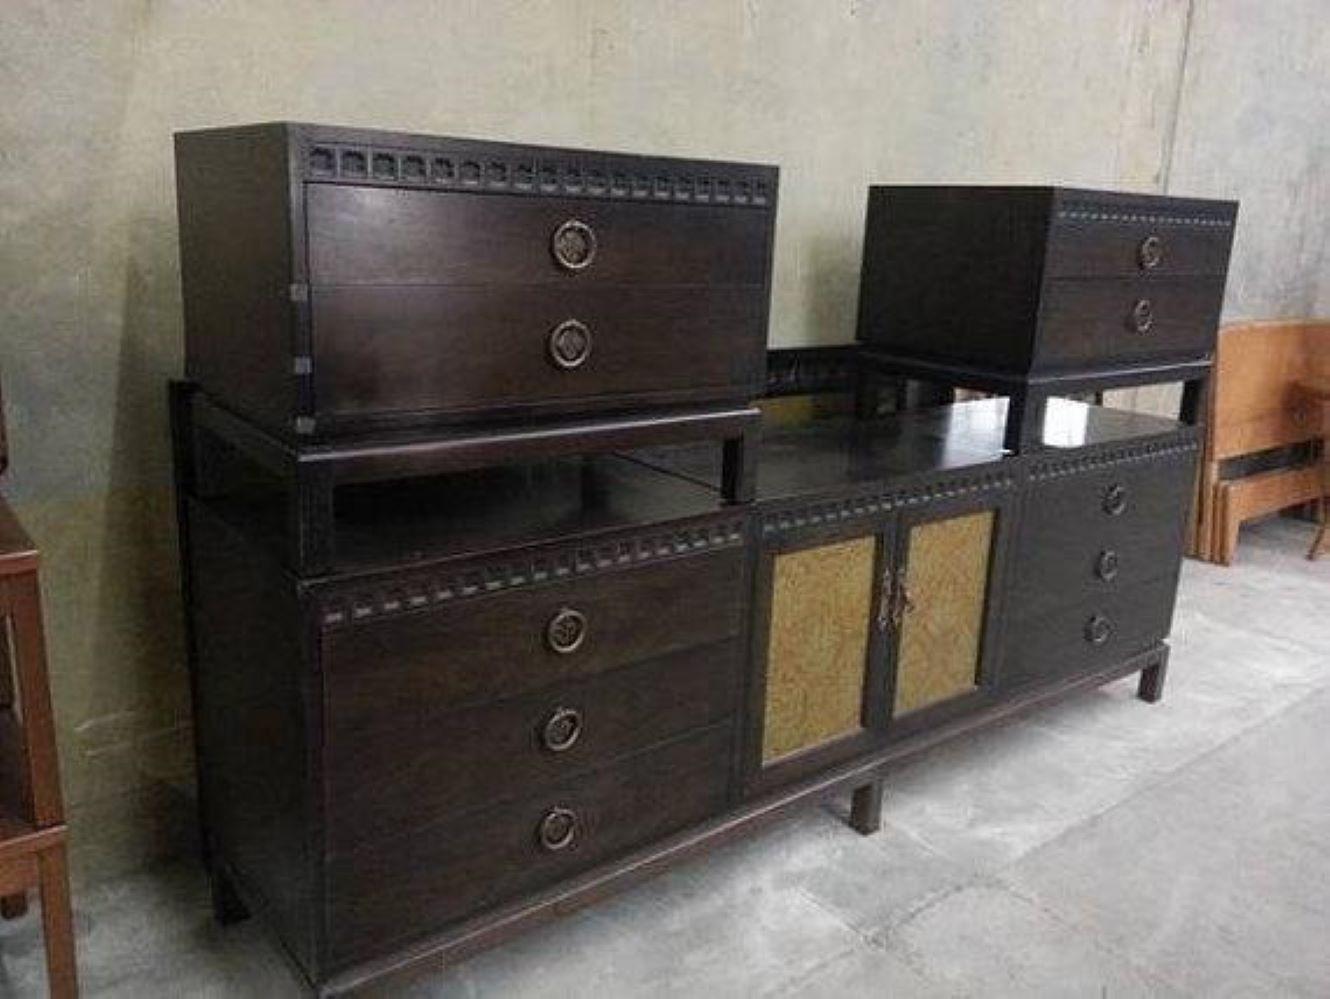 Kalpe 5 Piece Bedroom Set, by John Kalpe.

This Set Consists Of Headboard, Mirror, 2 Nightstands Or 2 Bedside Cabinets, Long Dresser.

This Set Of 5 Pieces Has Minor Ware Consistent With Its Age, Which Does Not Take Away From Its Beauty Or